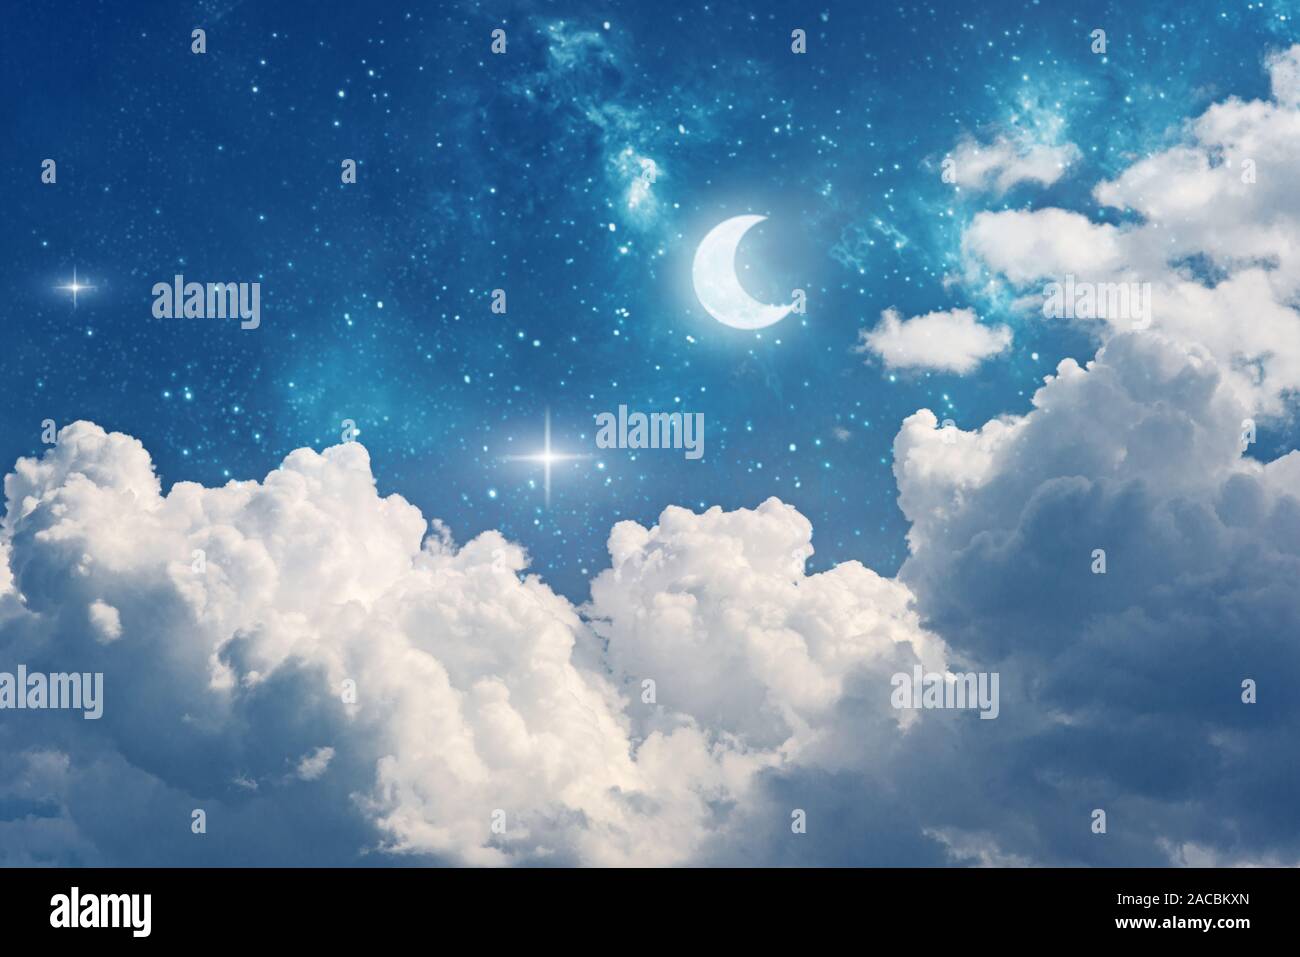 fantasy night sky background with stars, moon and clouds Stock Photo